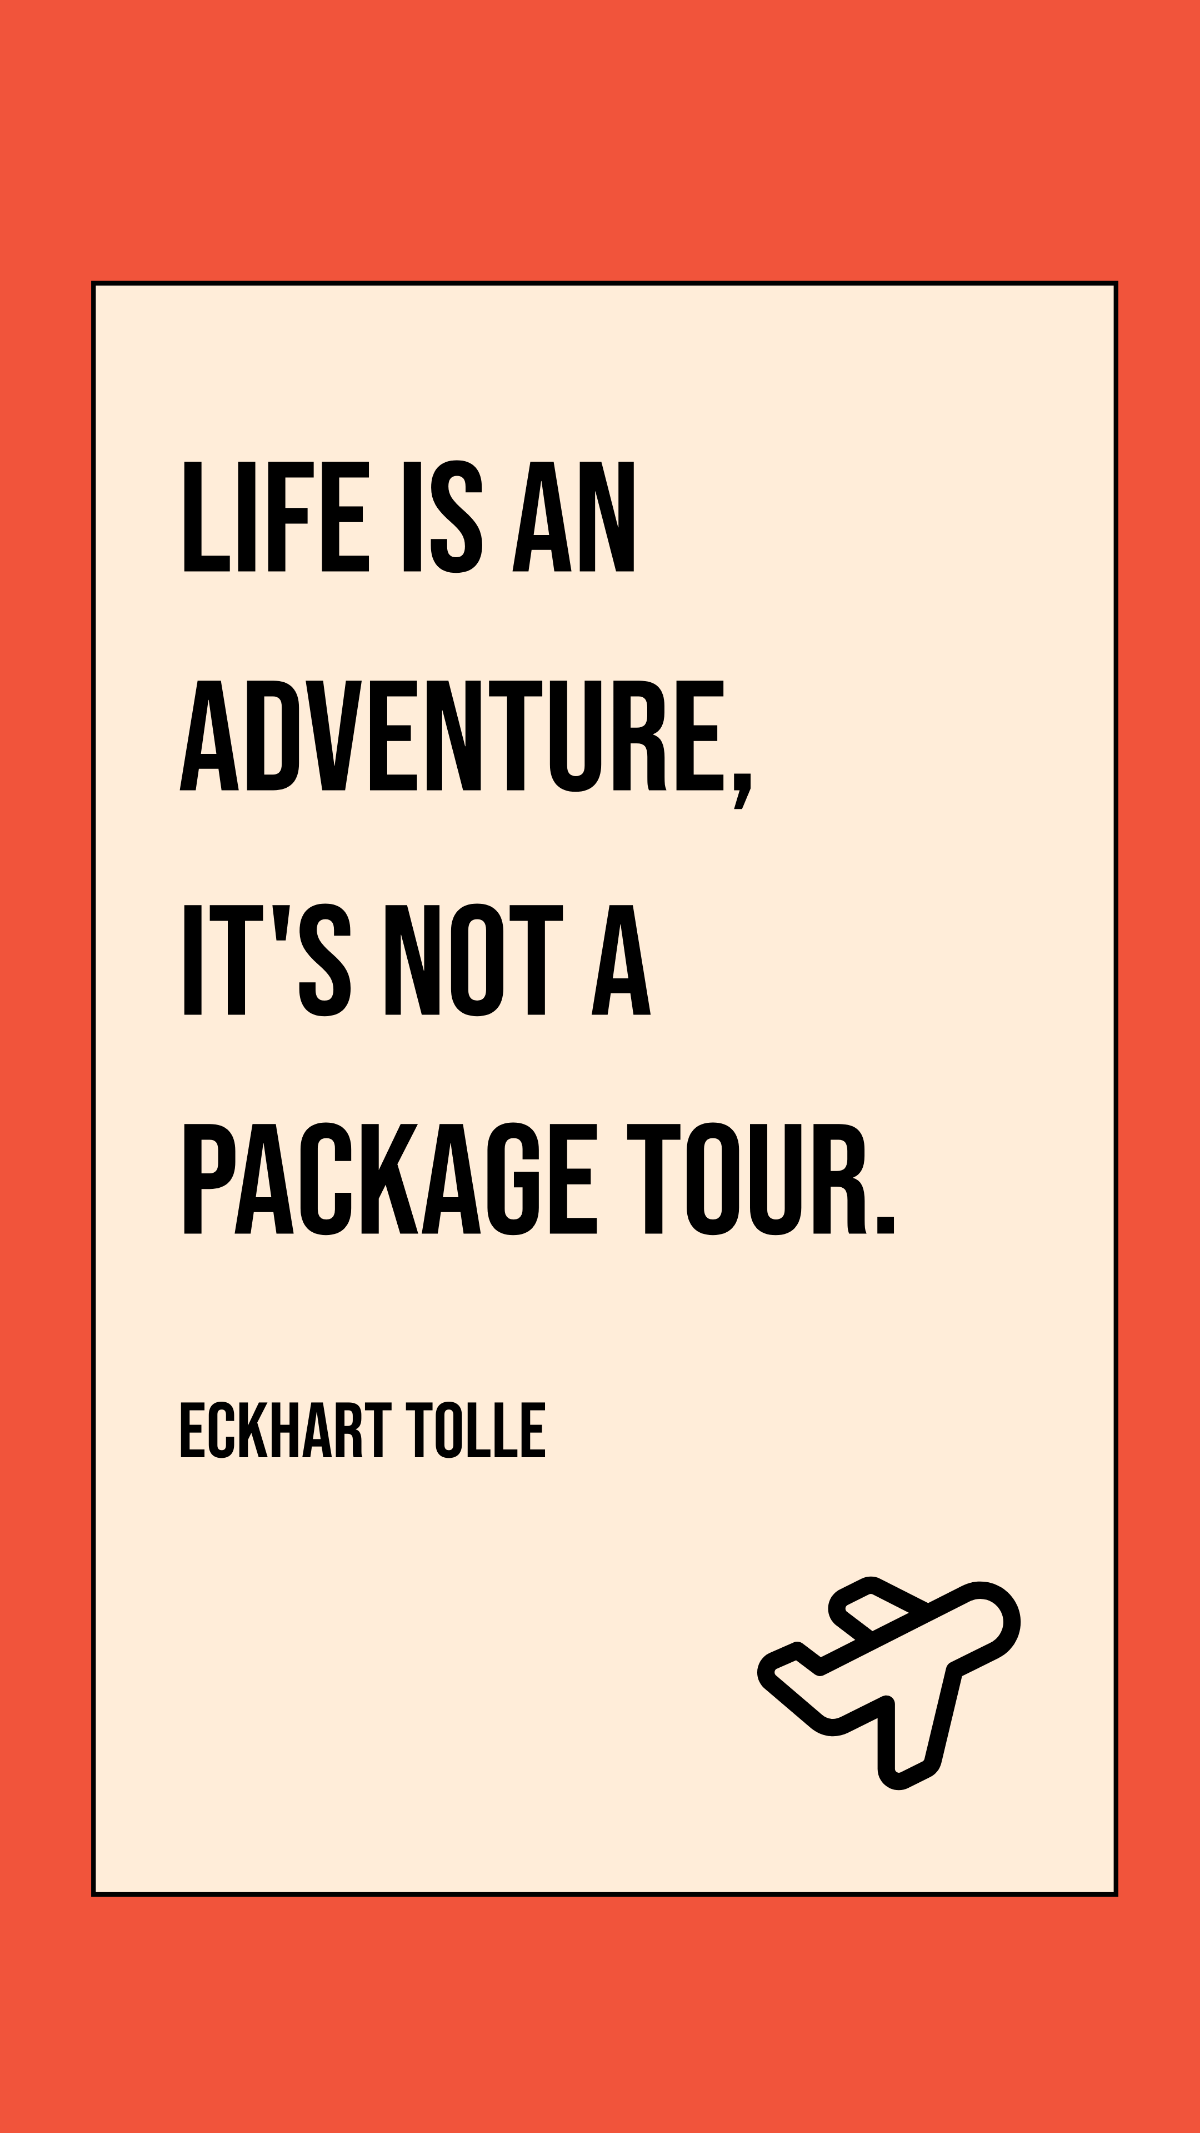 Free Eckhart Tolle -Life is an adventure, it's not a package tour. Template